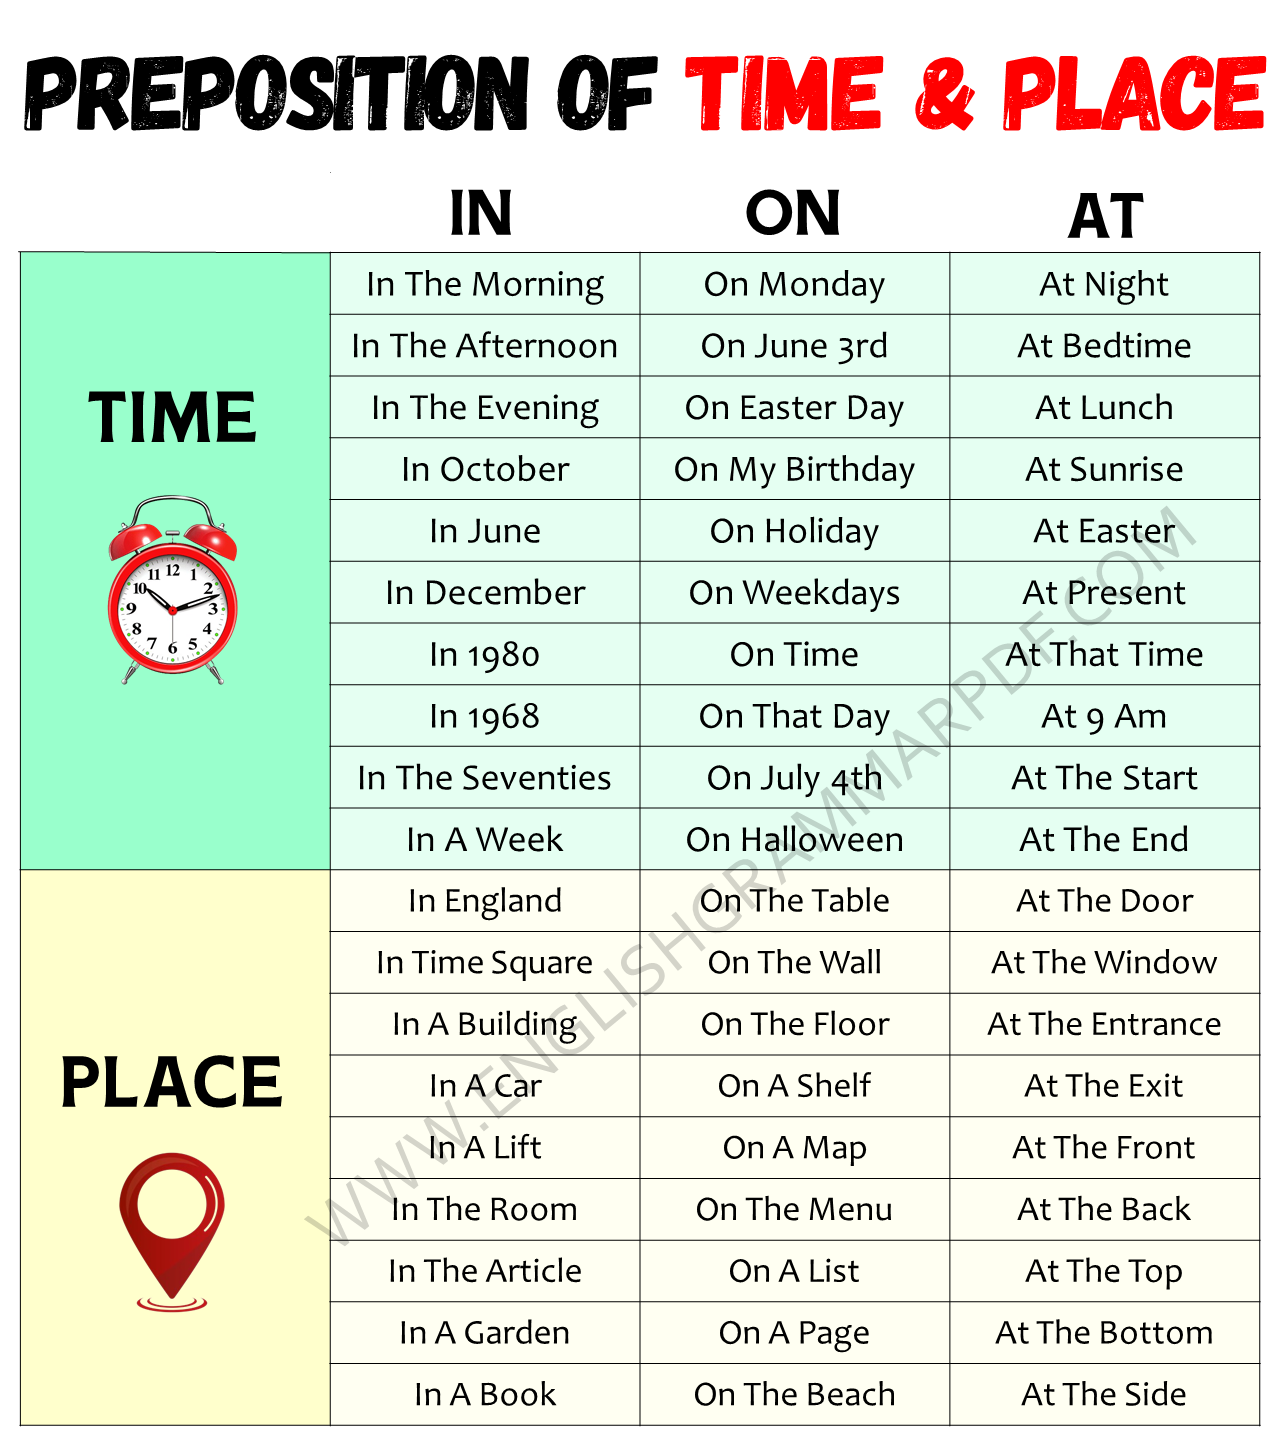 Preposition of Time & Place